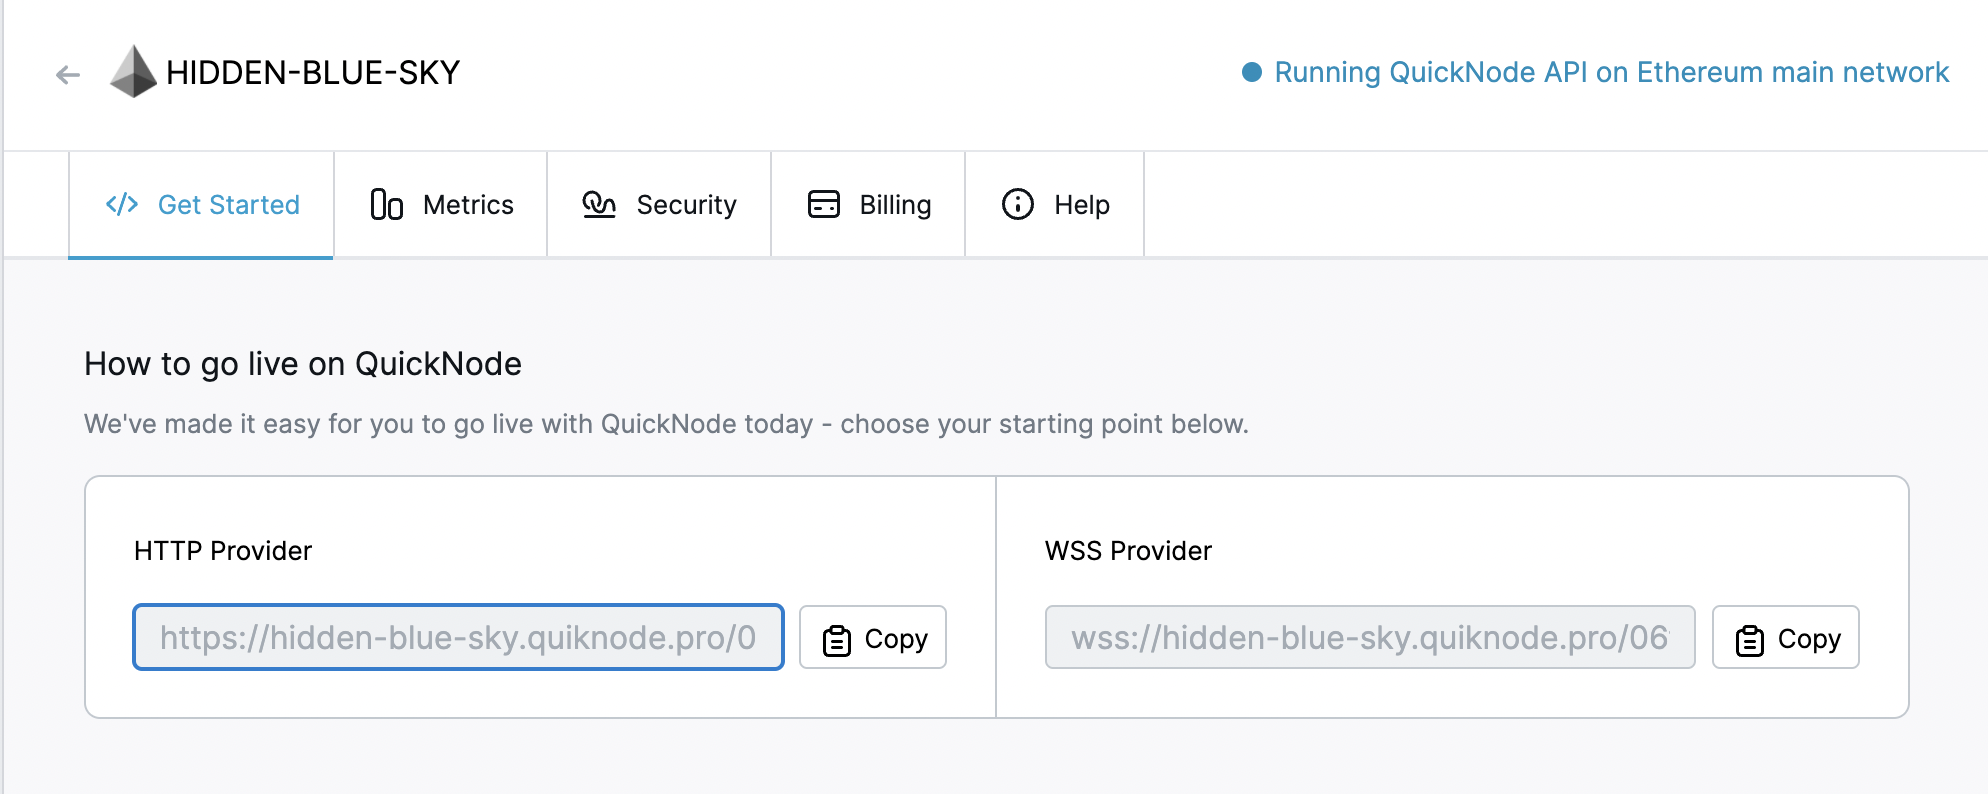 A screenshot of the Getting Started page on QuickNode with HTTP and WSS links for the Ethereum endpoint